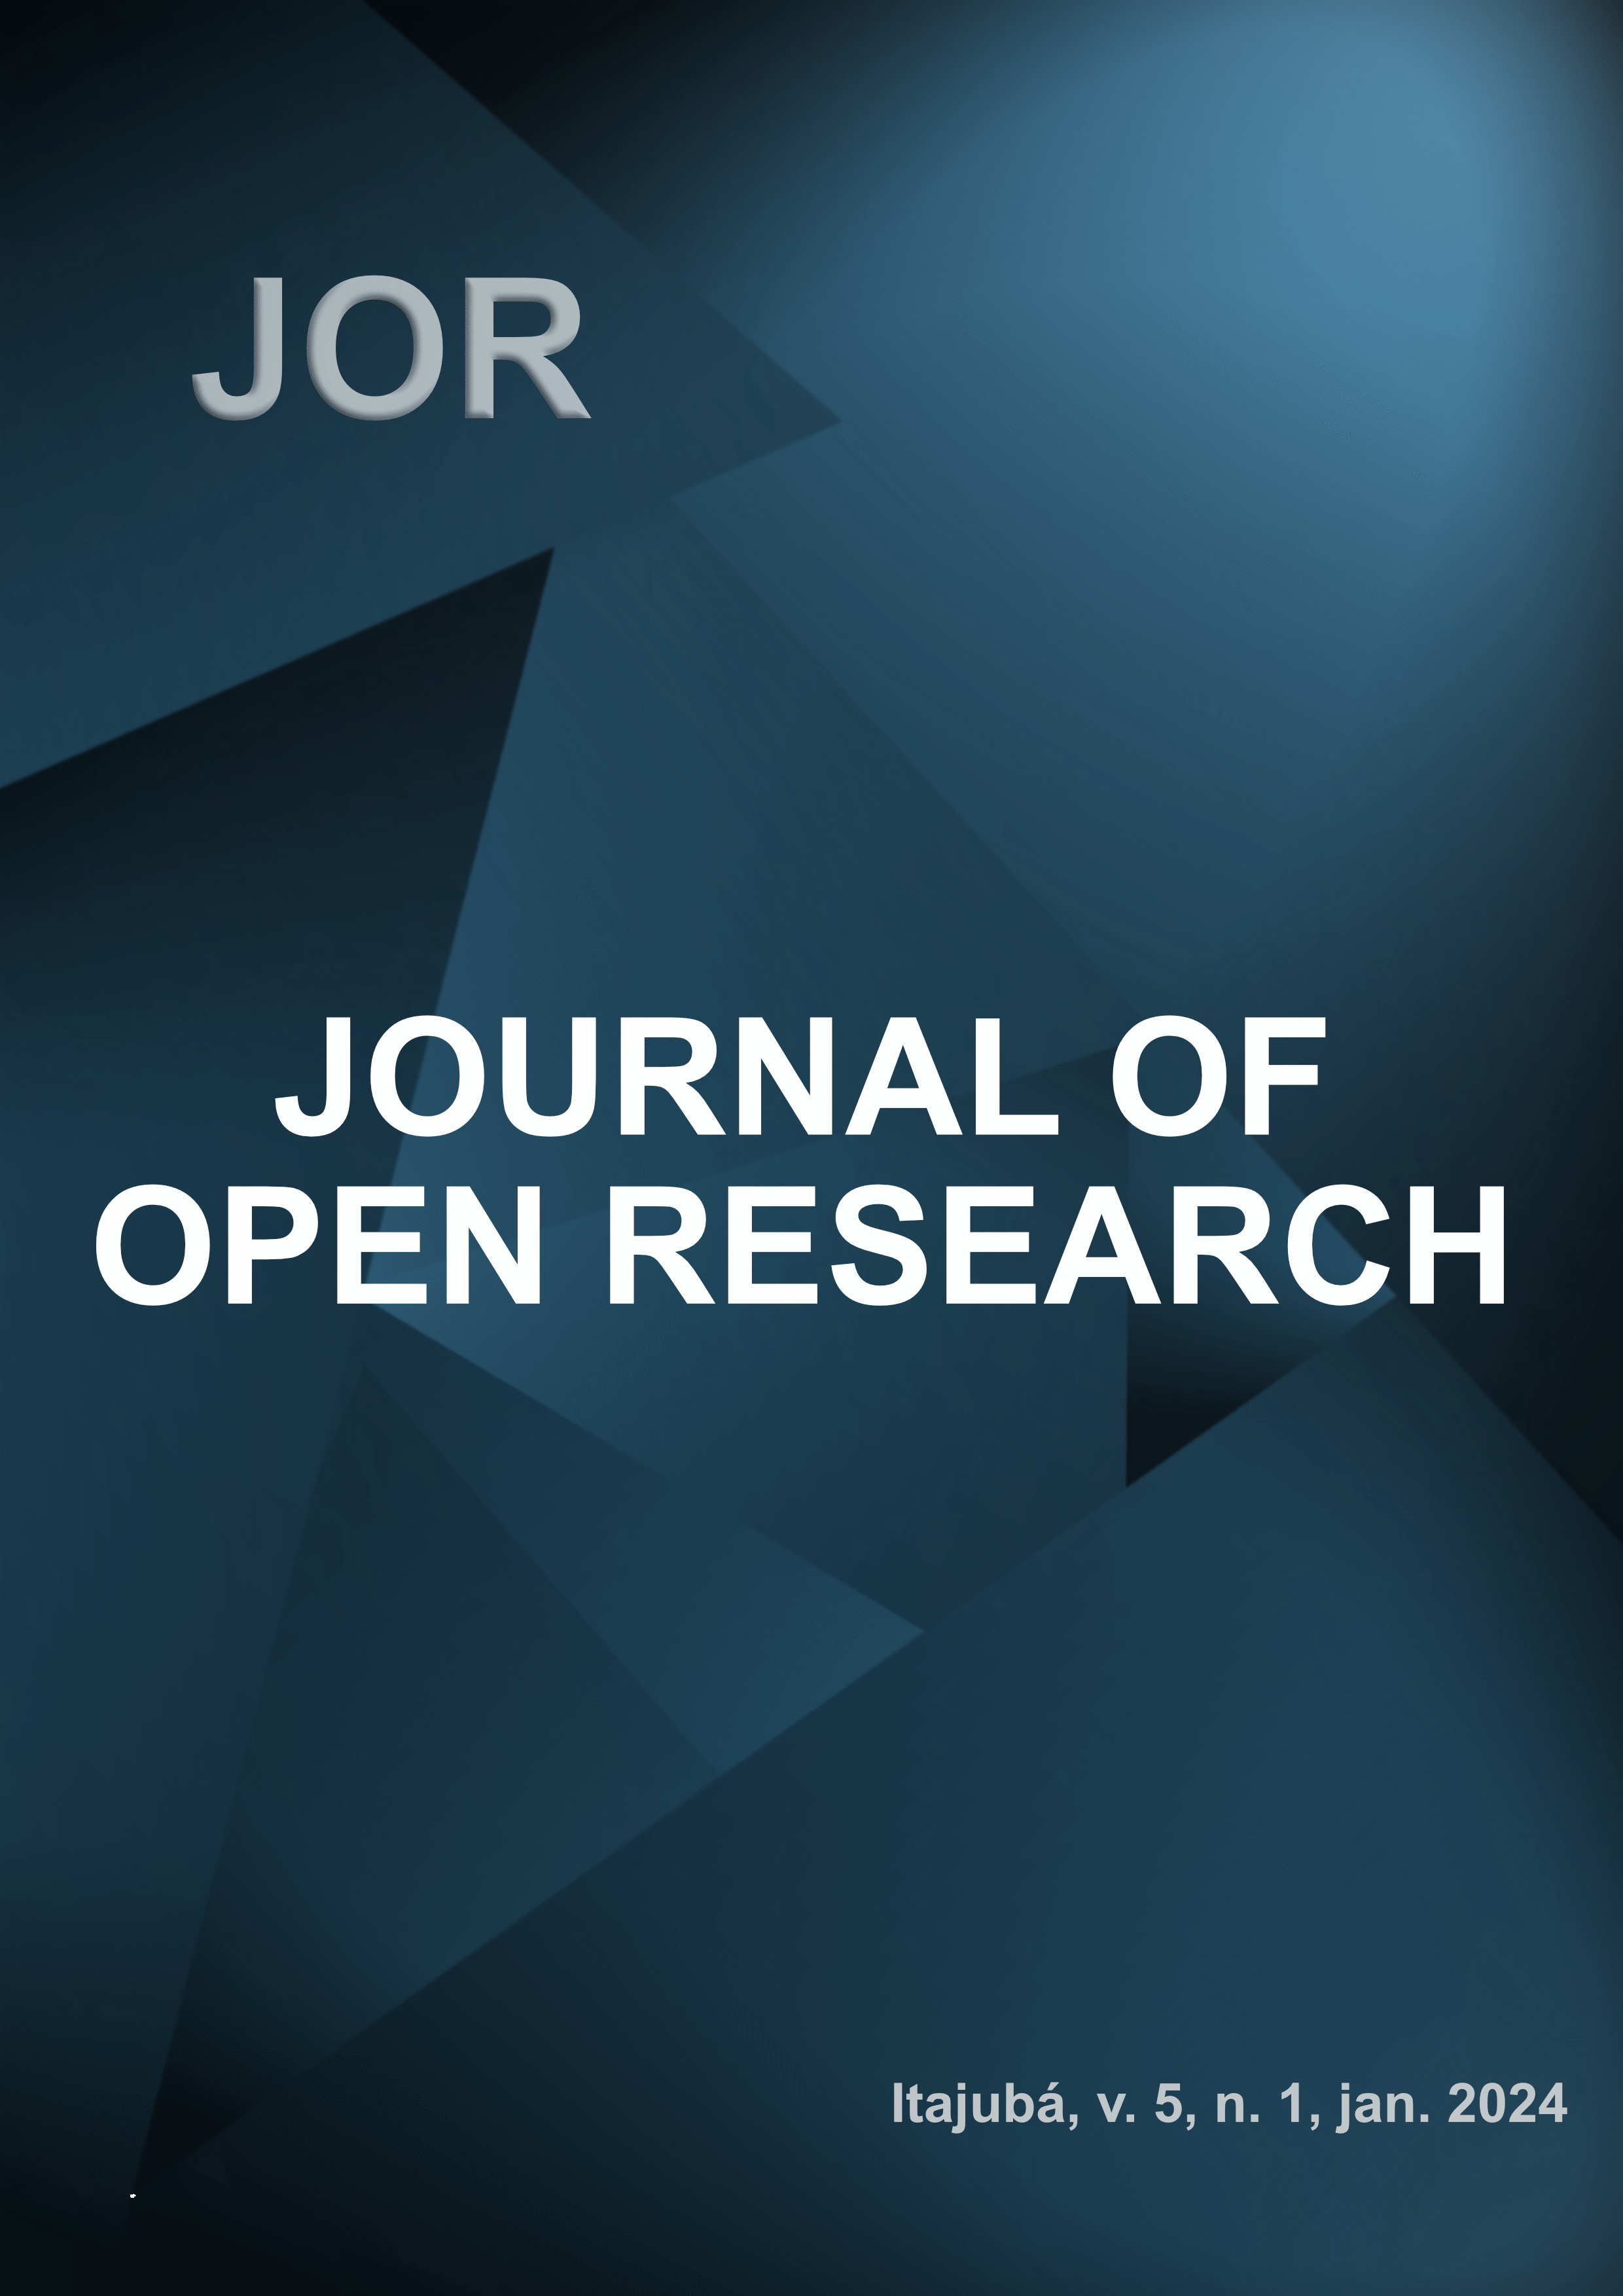 					Visualizar v. 5 n. 1 (2024): JOURNAL OF OPEN RESEARCH
				